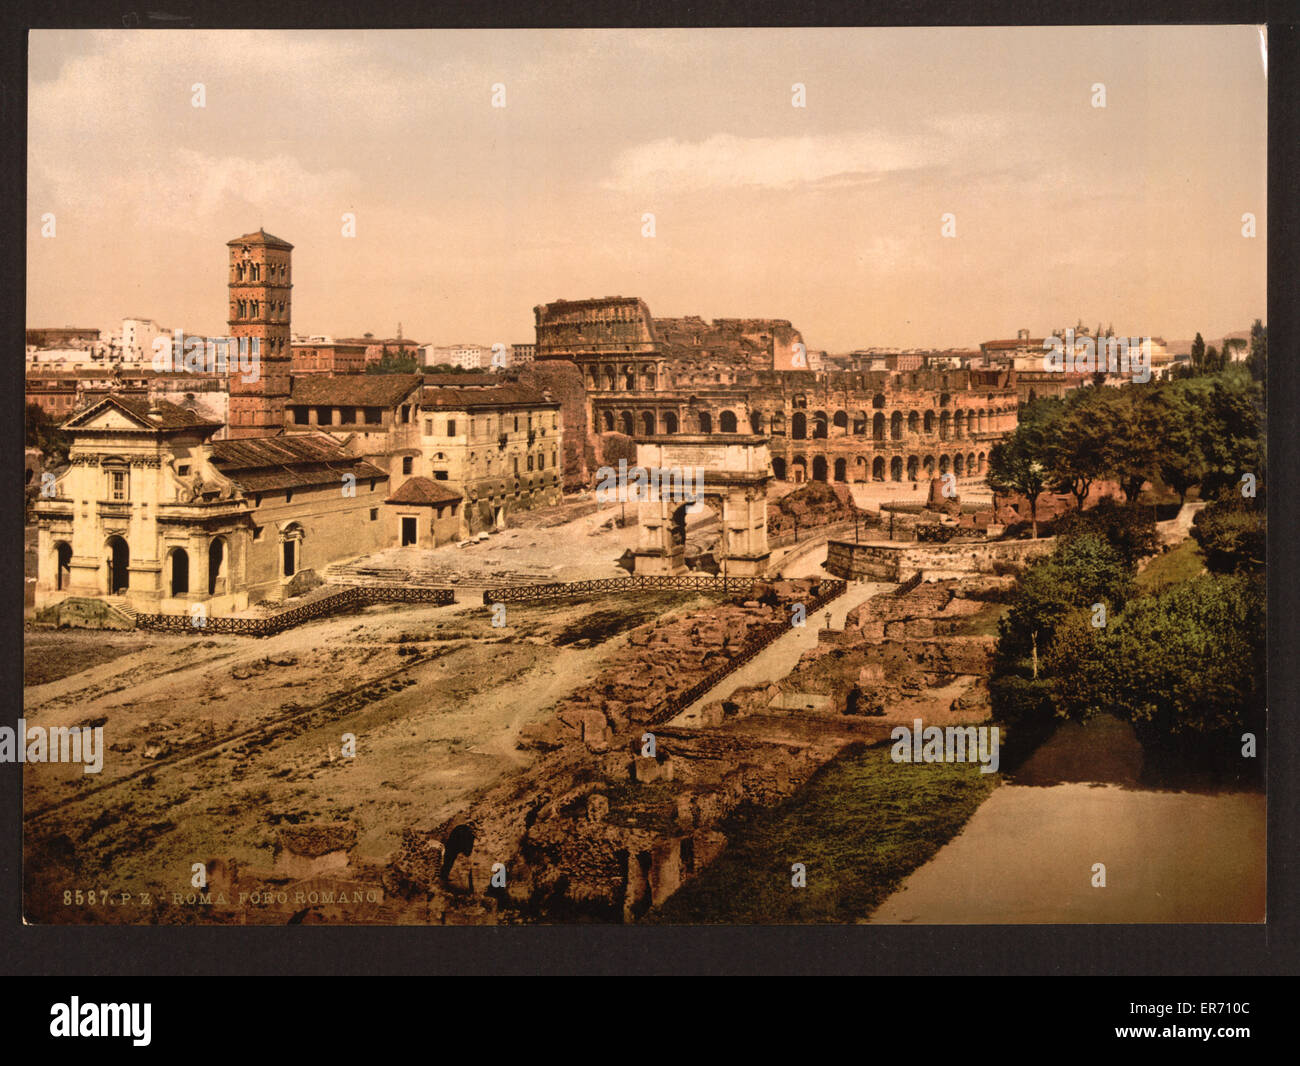 Forum Romanum from the Palatine, Rome, Italy. Date between ca. 1890 and ca. 1900. Stock Photo